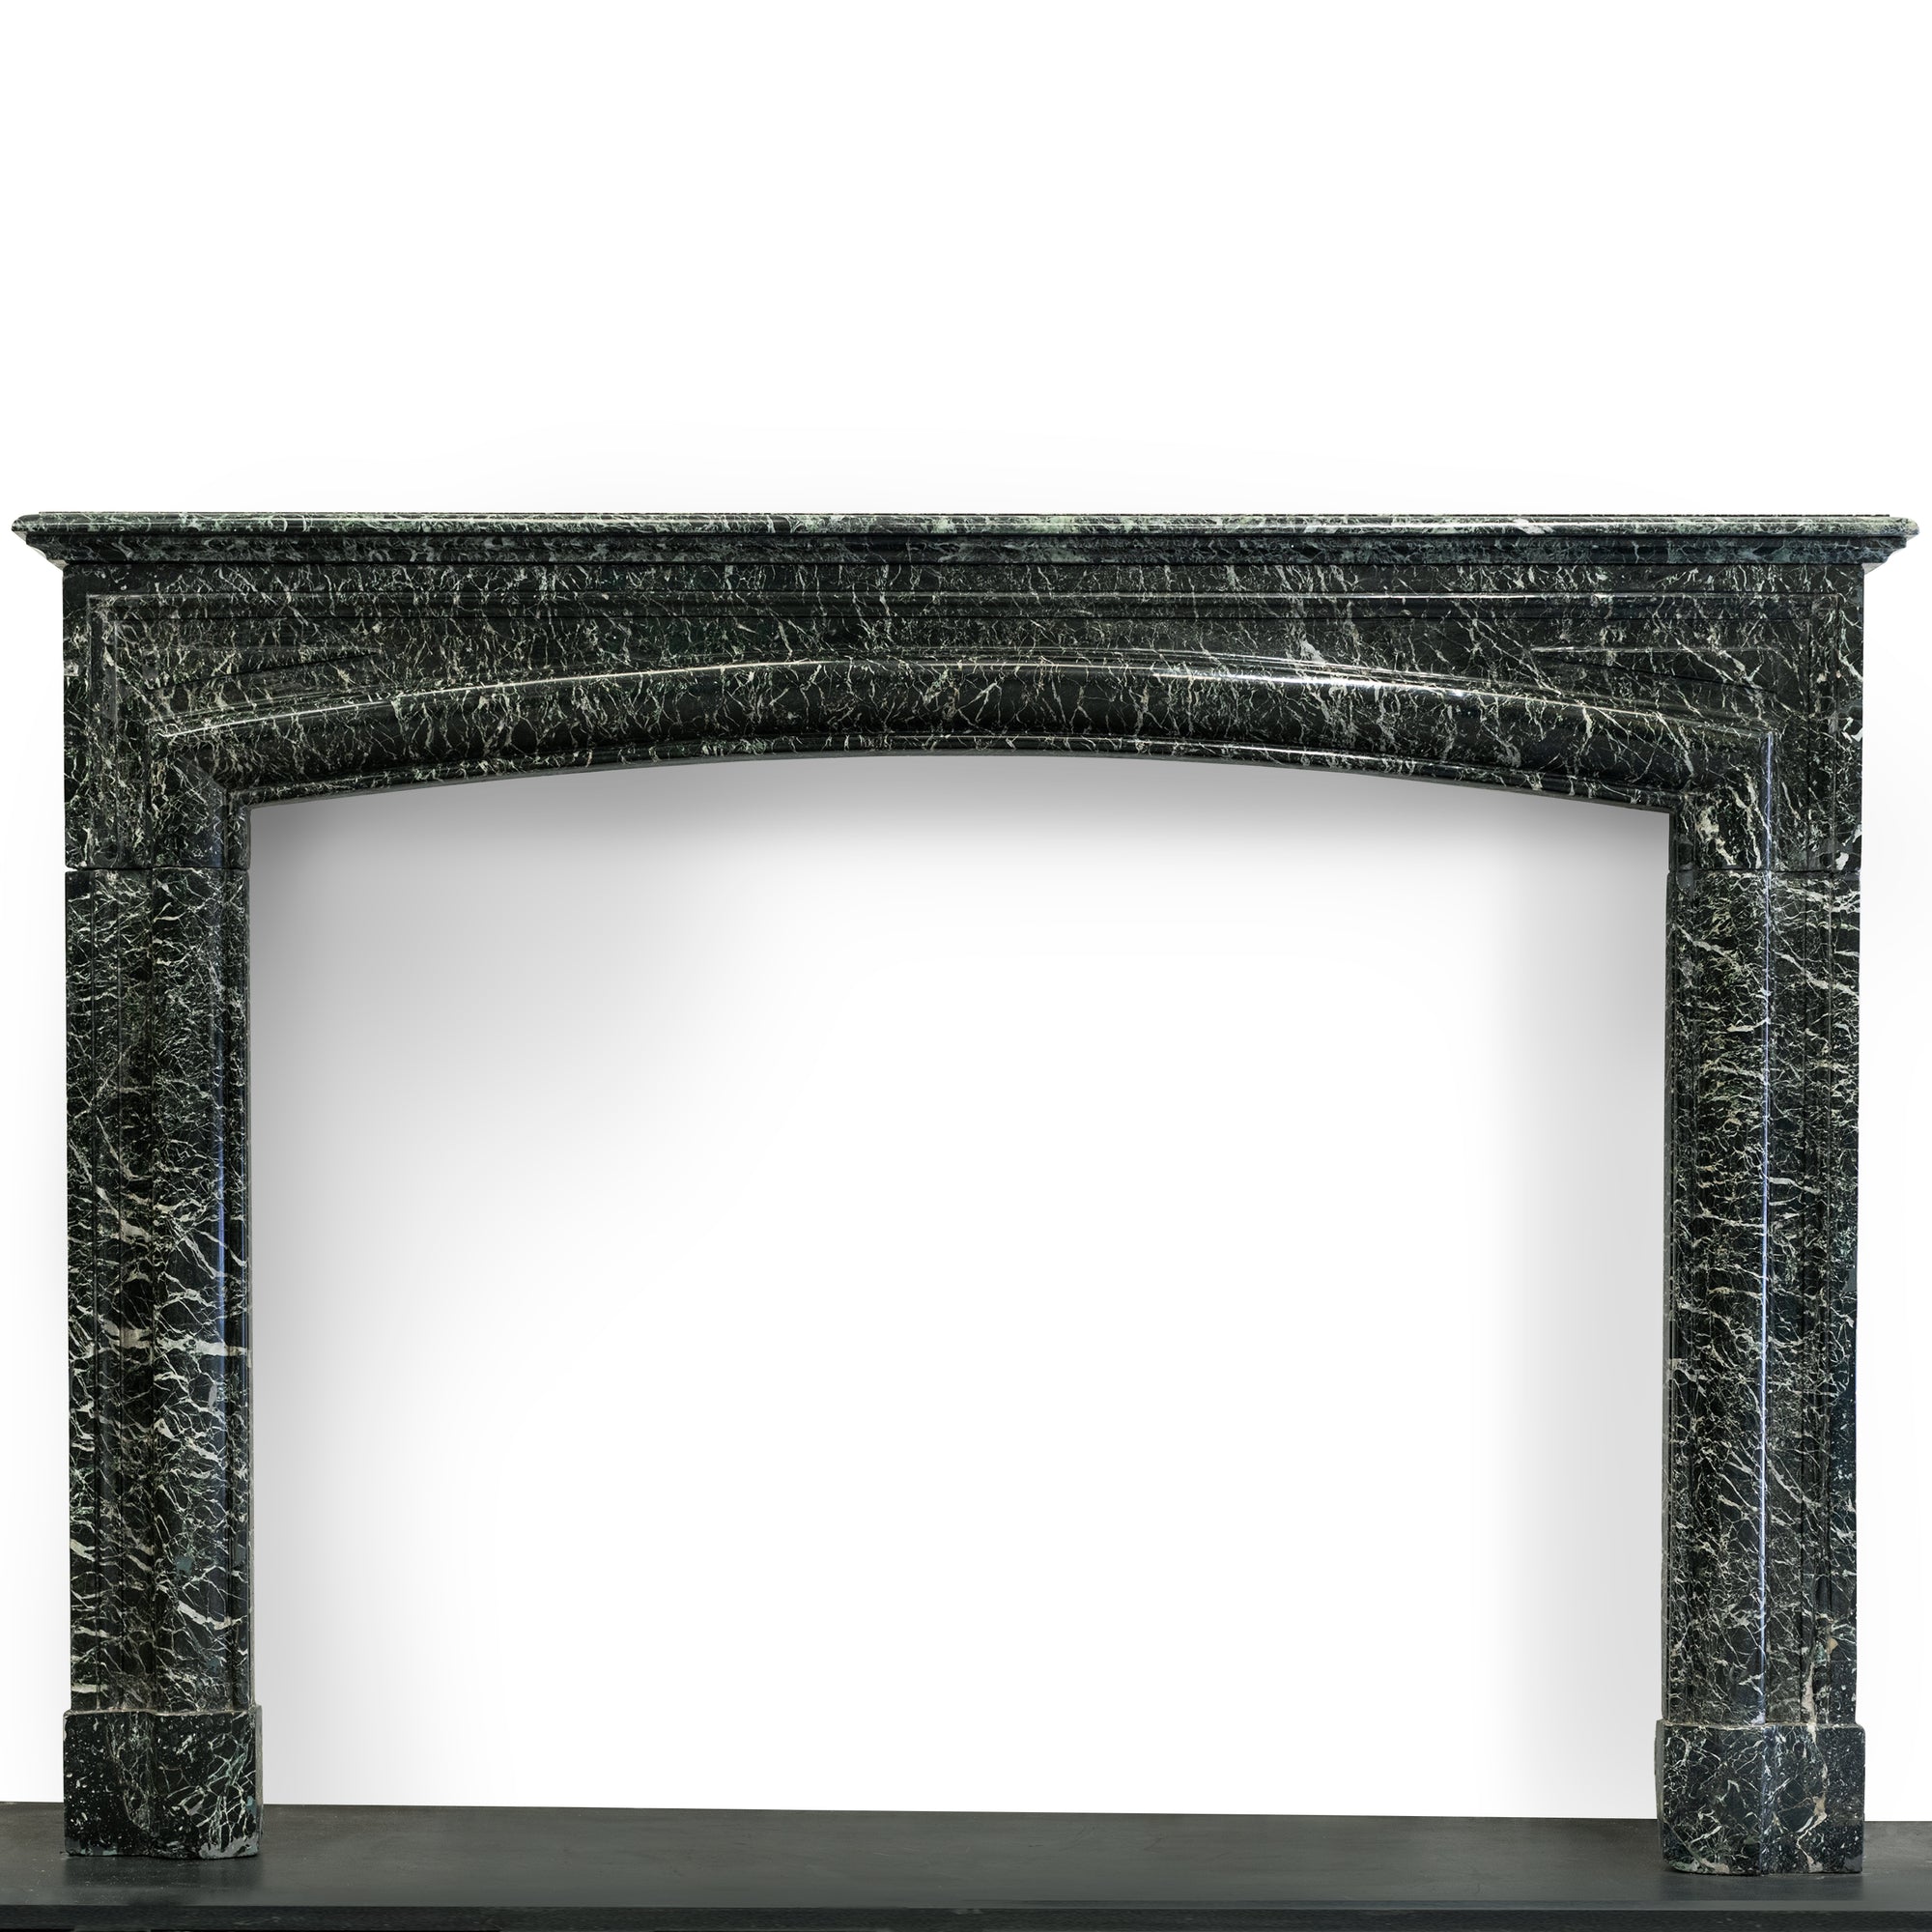 Antique French Louis XIV Style Verdi Marble Fireplace Surround | The Architectural Forum